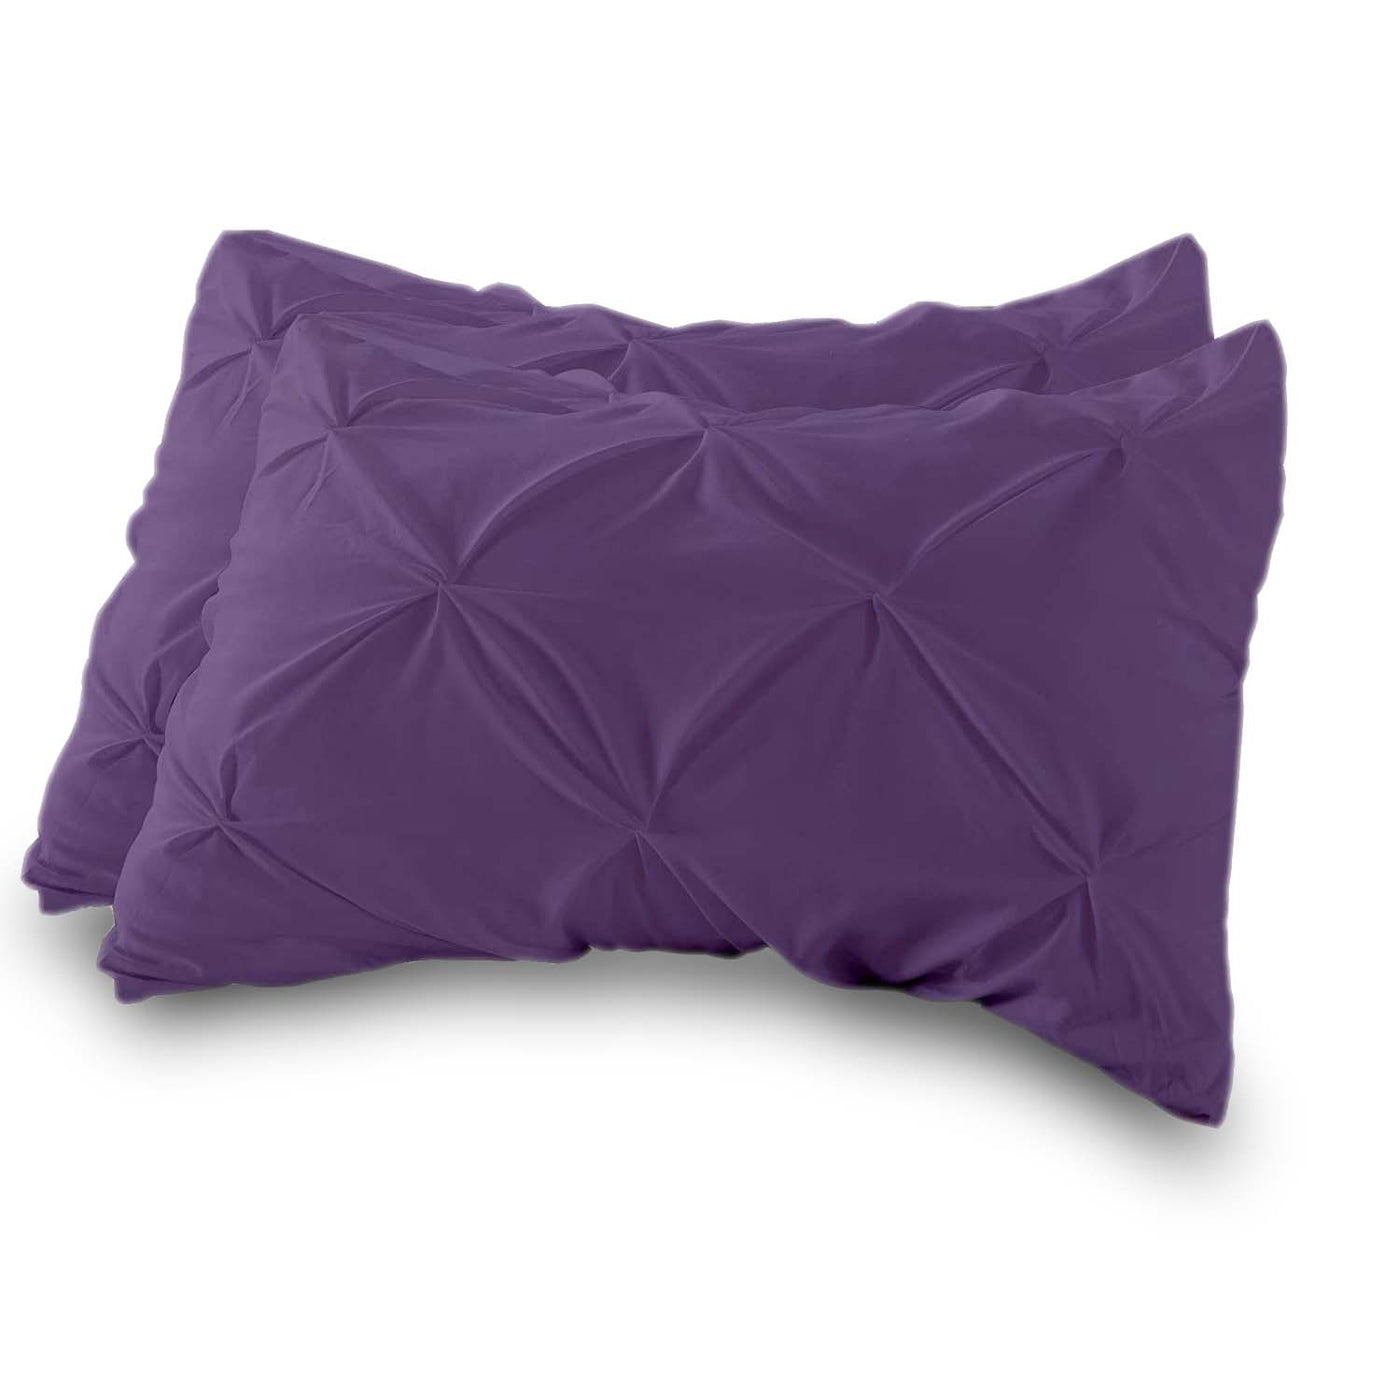 Set Of 2 - 300 TC Egyptian Cotton Pinch Pleated Pillow Covers - Plum